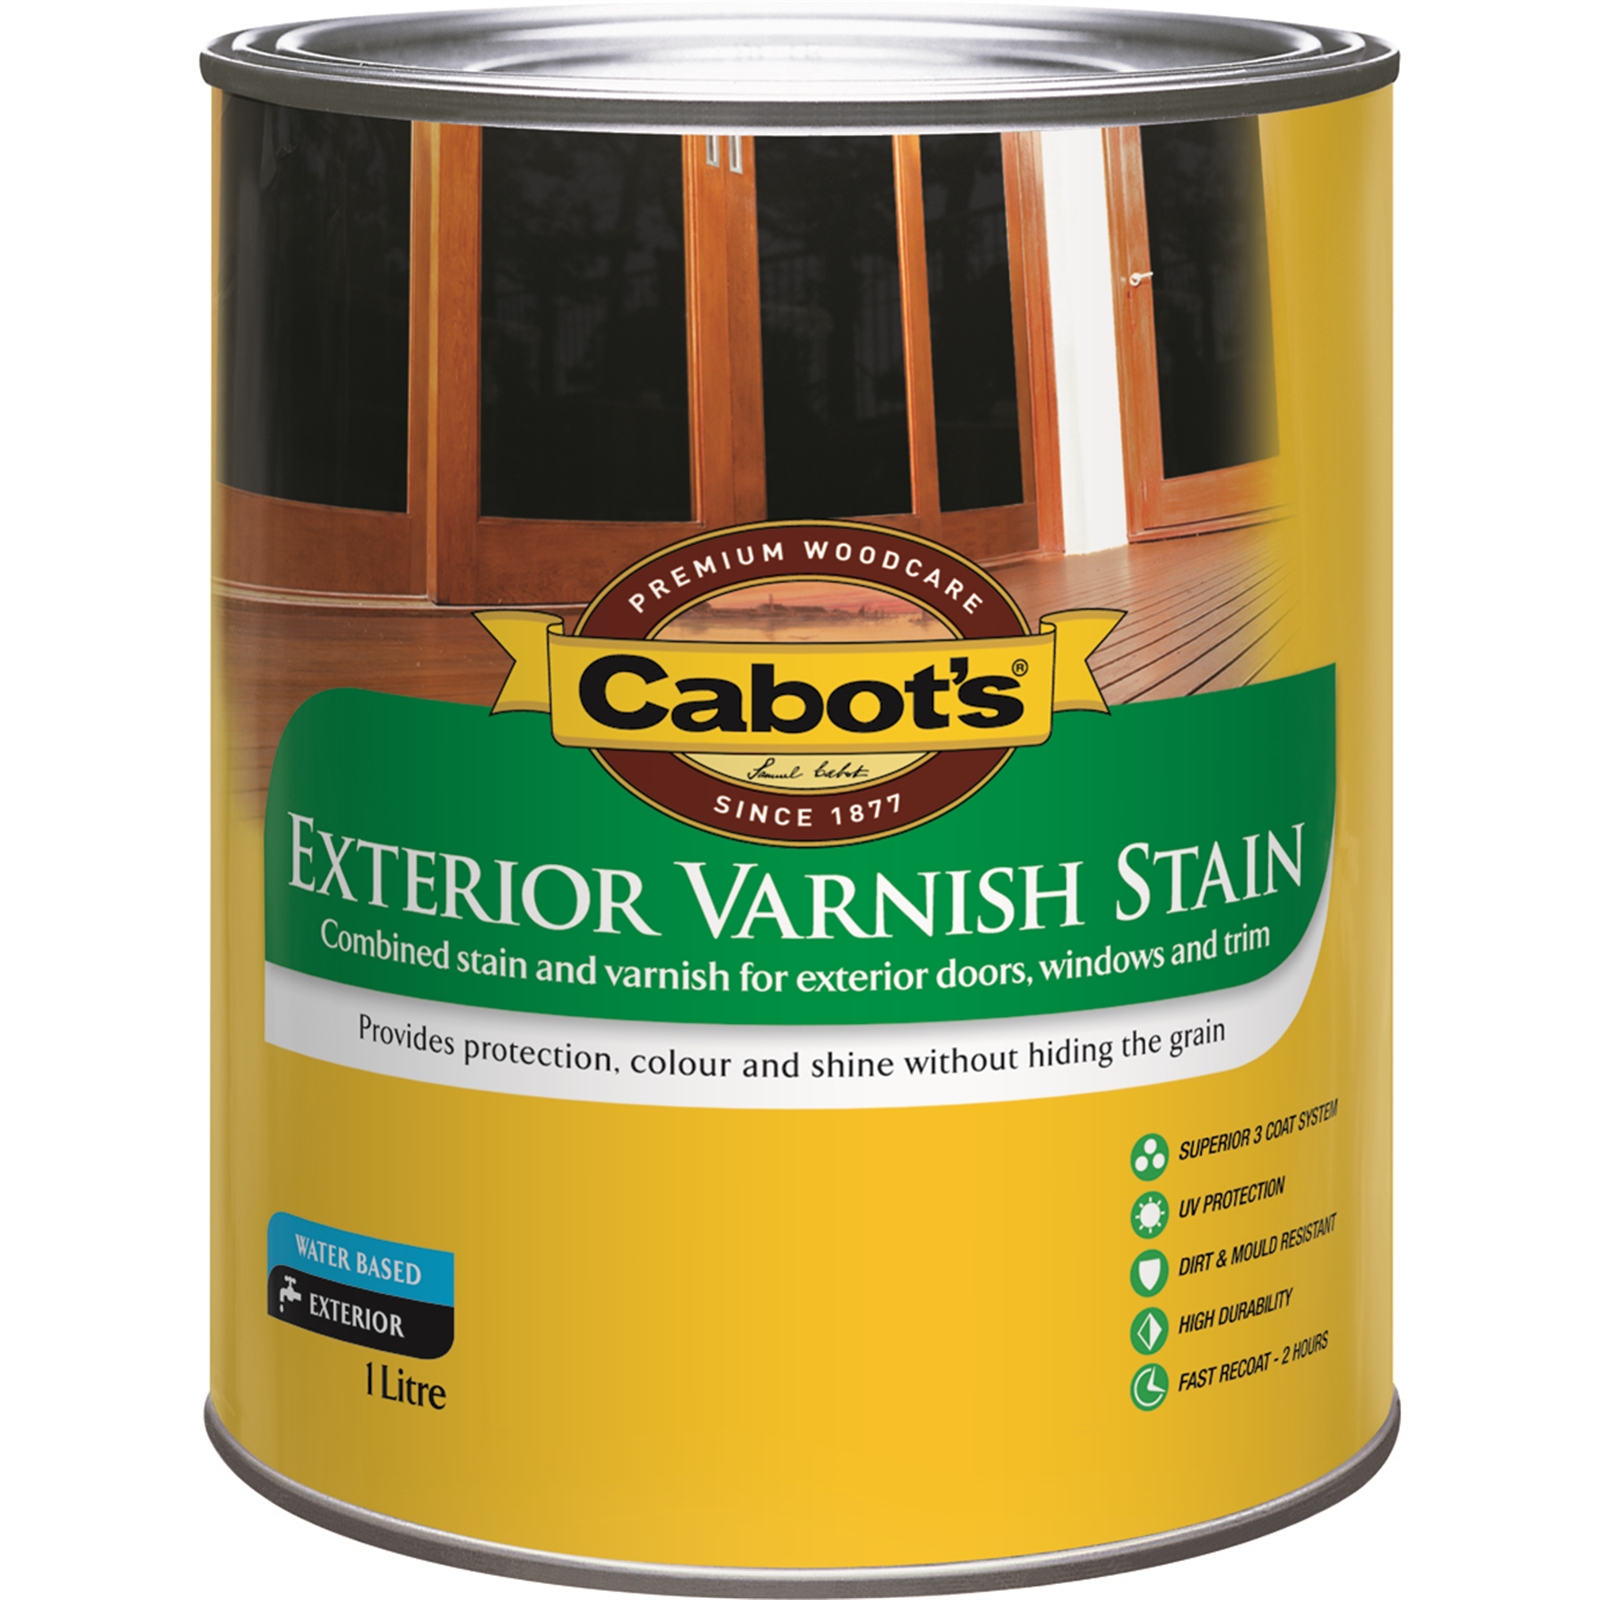 Cabot's 1L Maple Exterior Varnish Stain